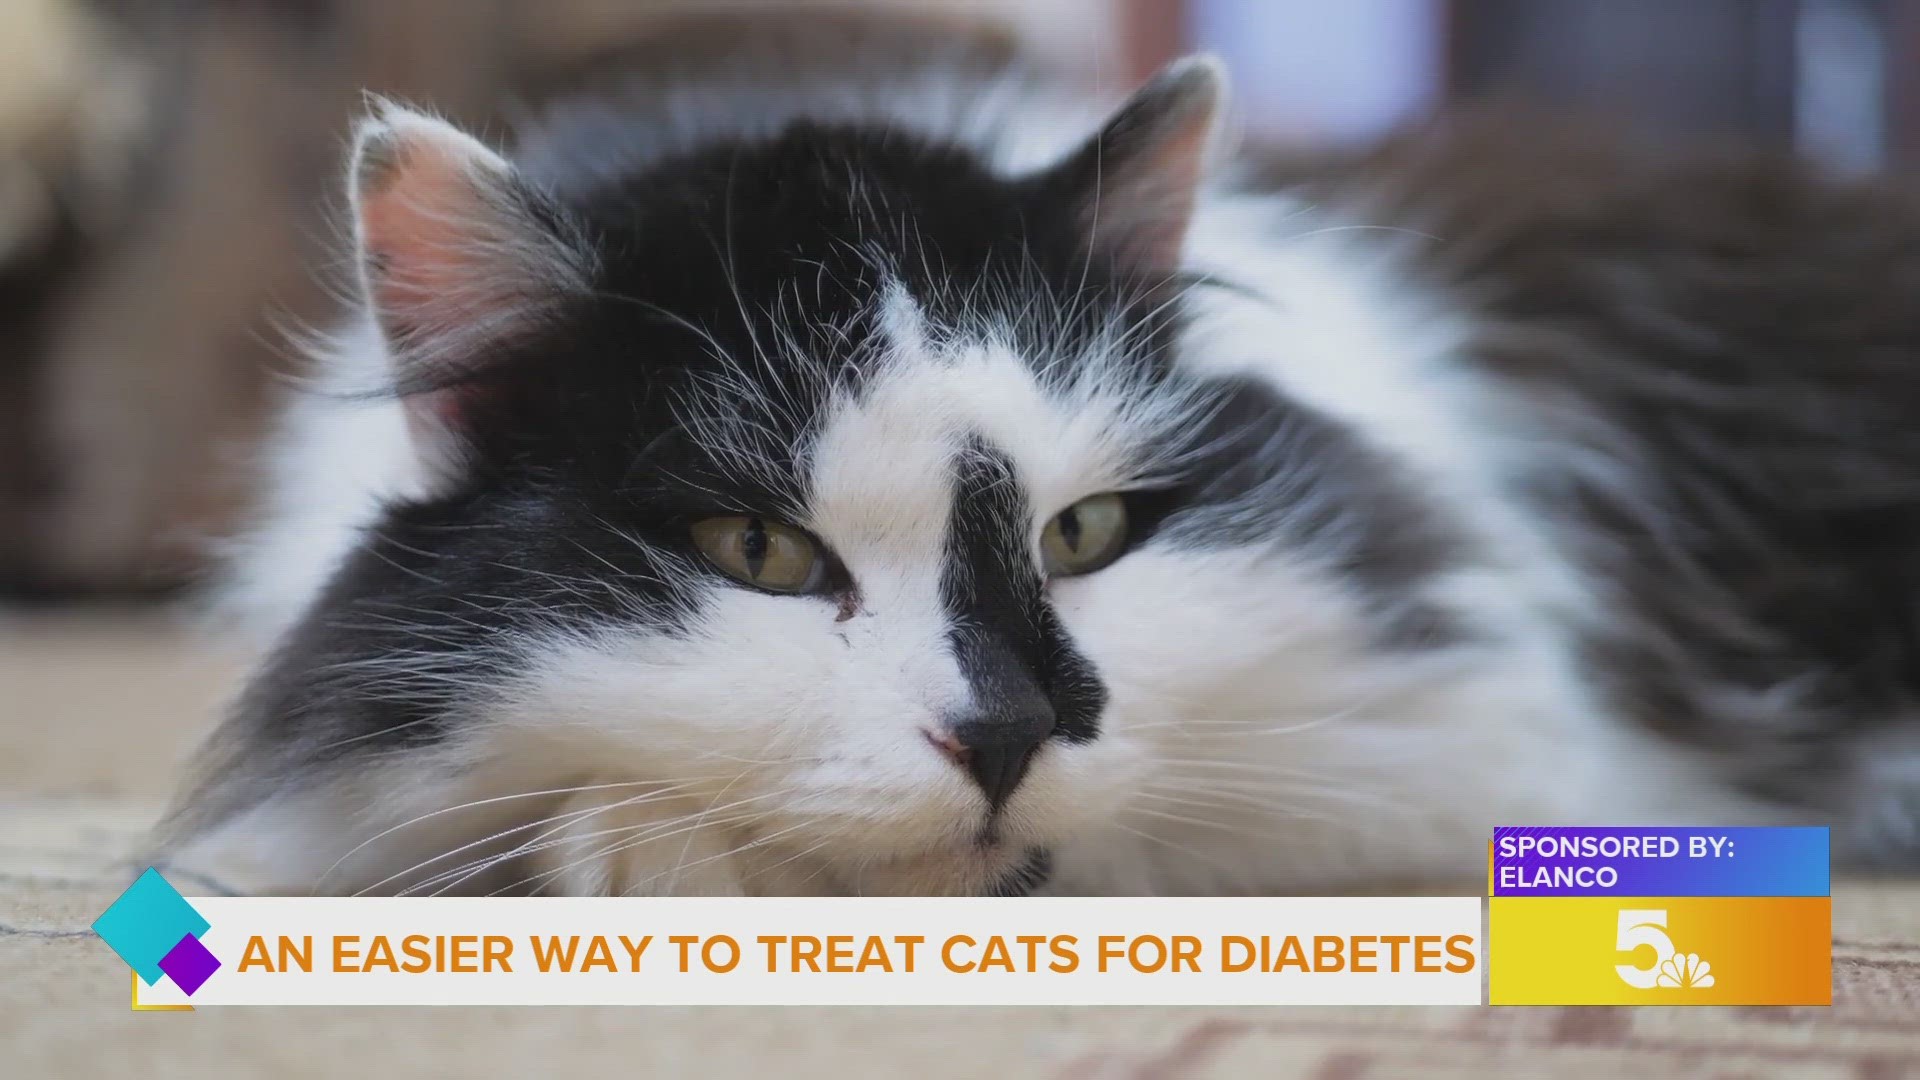 Roughly 46 point five million U-S households owns a cat - and with our furry friends - a concerning amount struggle with diabetes.